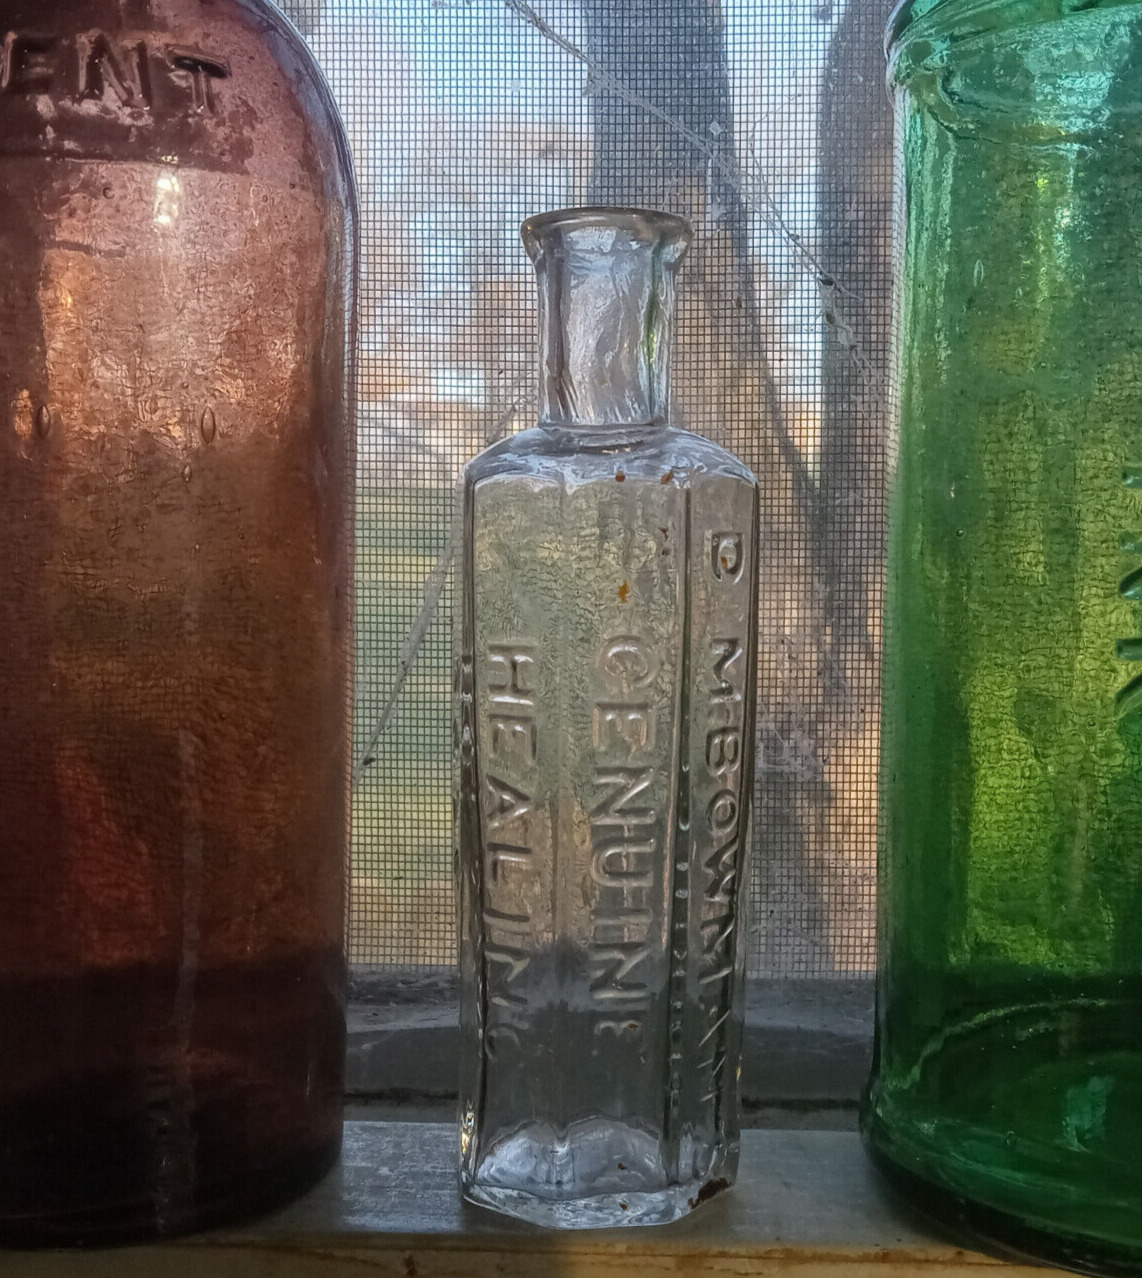 EARLY PONTILED FLINT GLASS DR.M.BOWMAN'S GENUINE HEALING BALSAM 8 SIDED BOTTLE